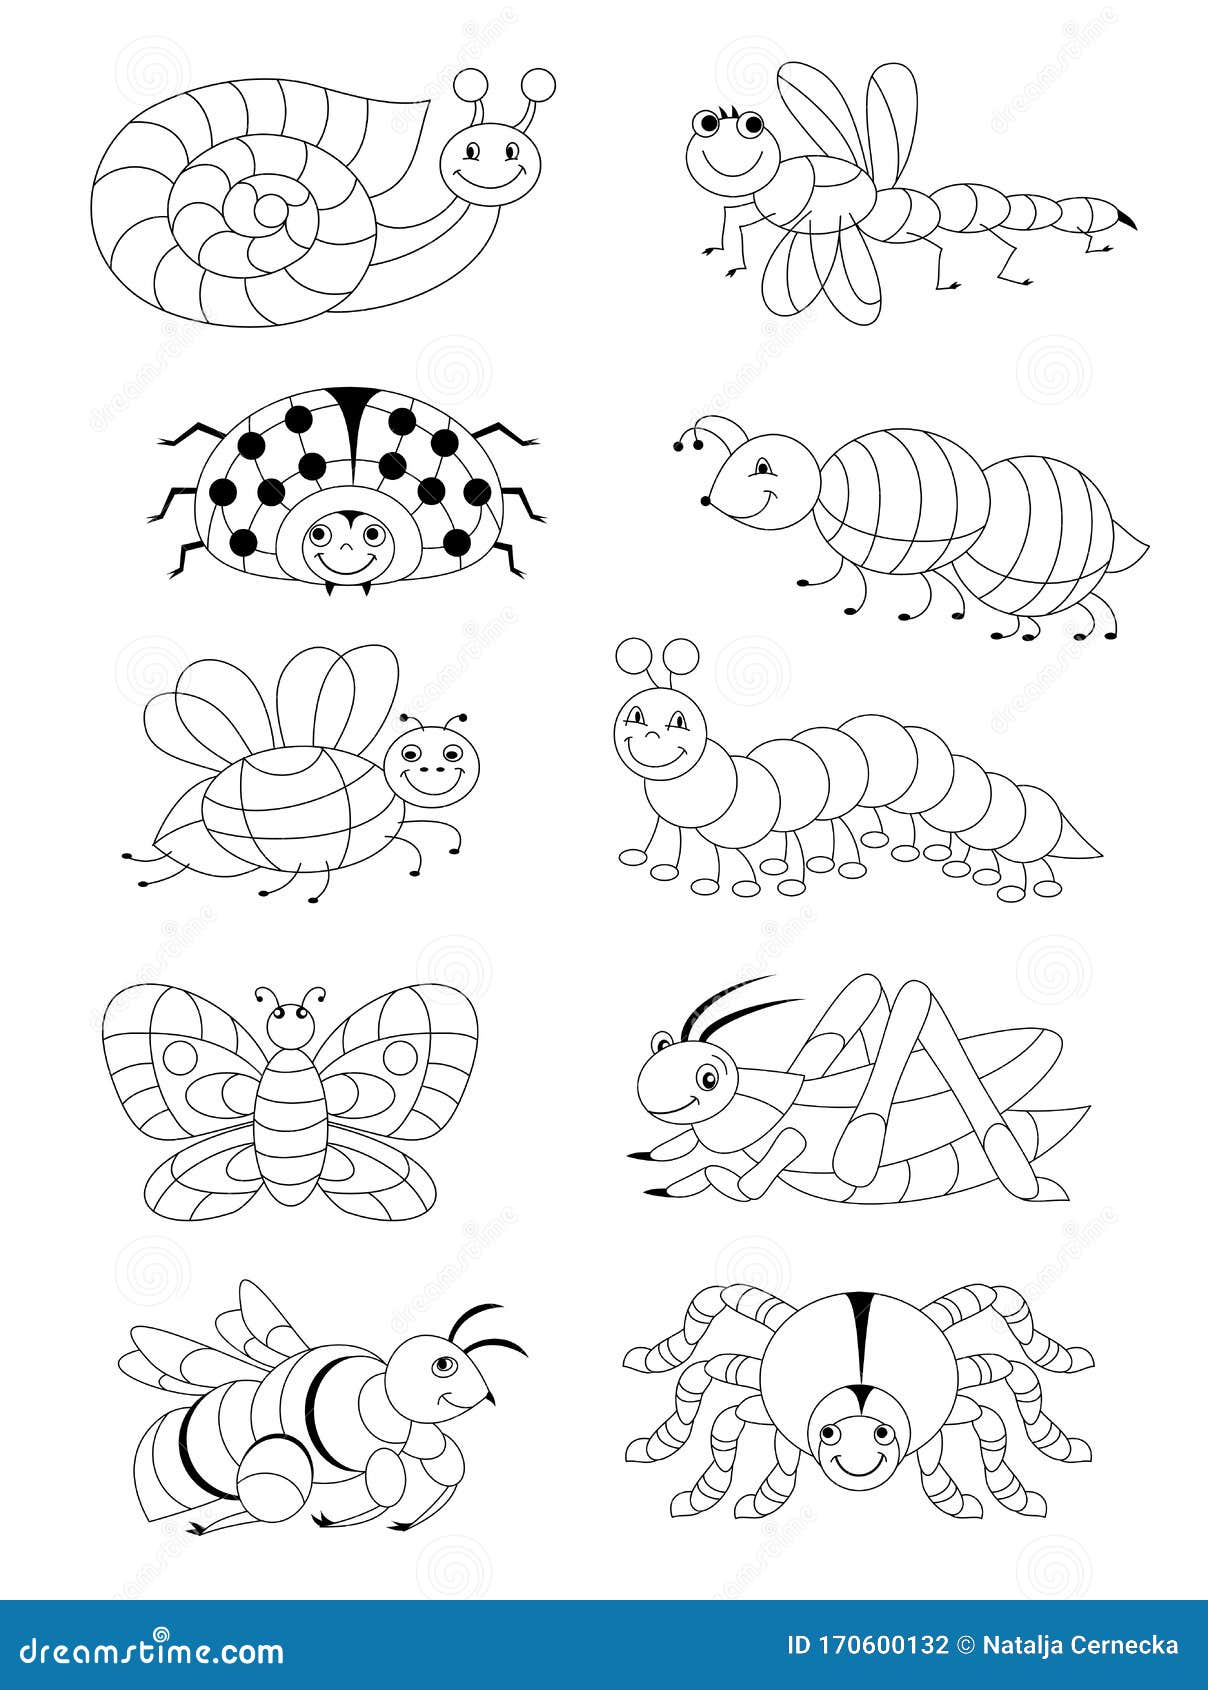 Coloring Insects Kids Stock Illustrations – 20 Coloring Insects ...